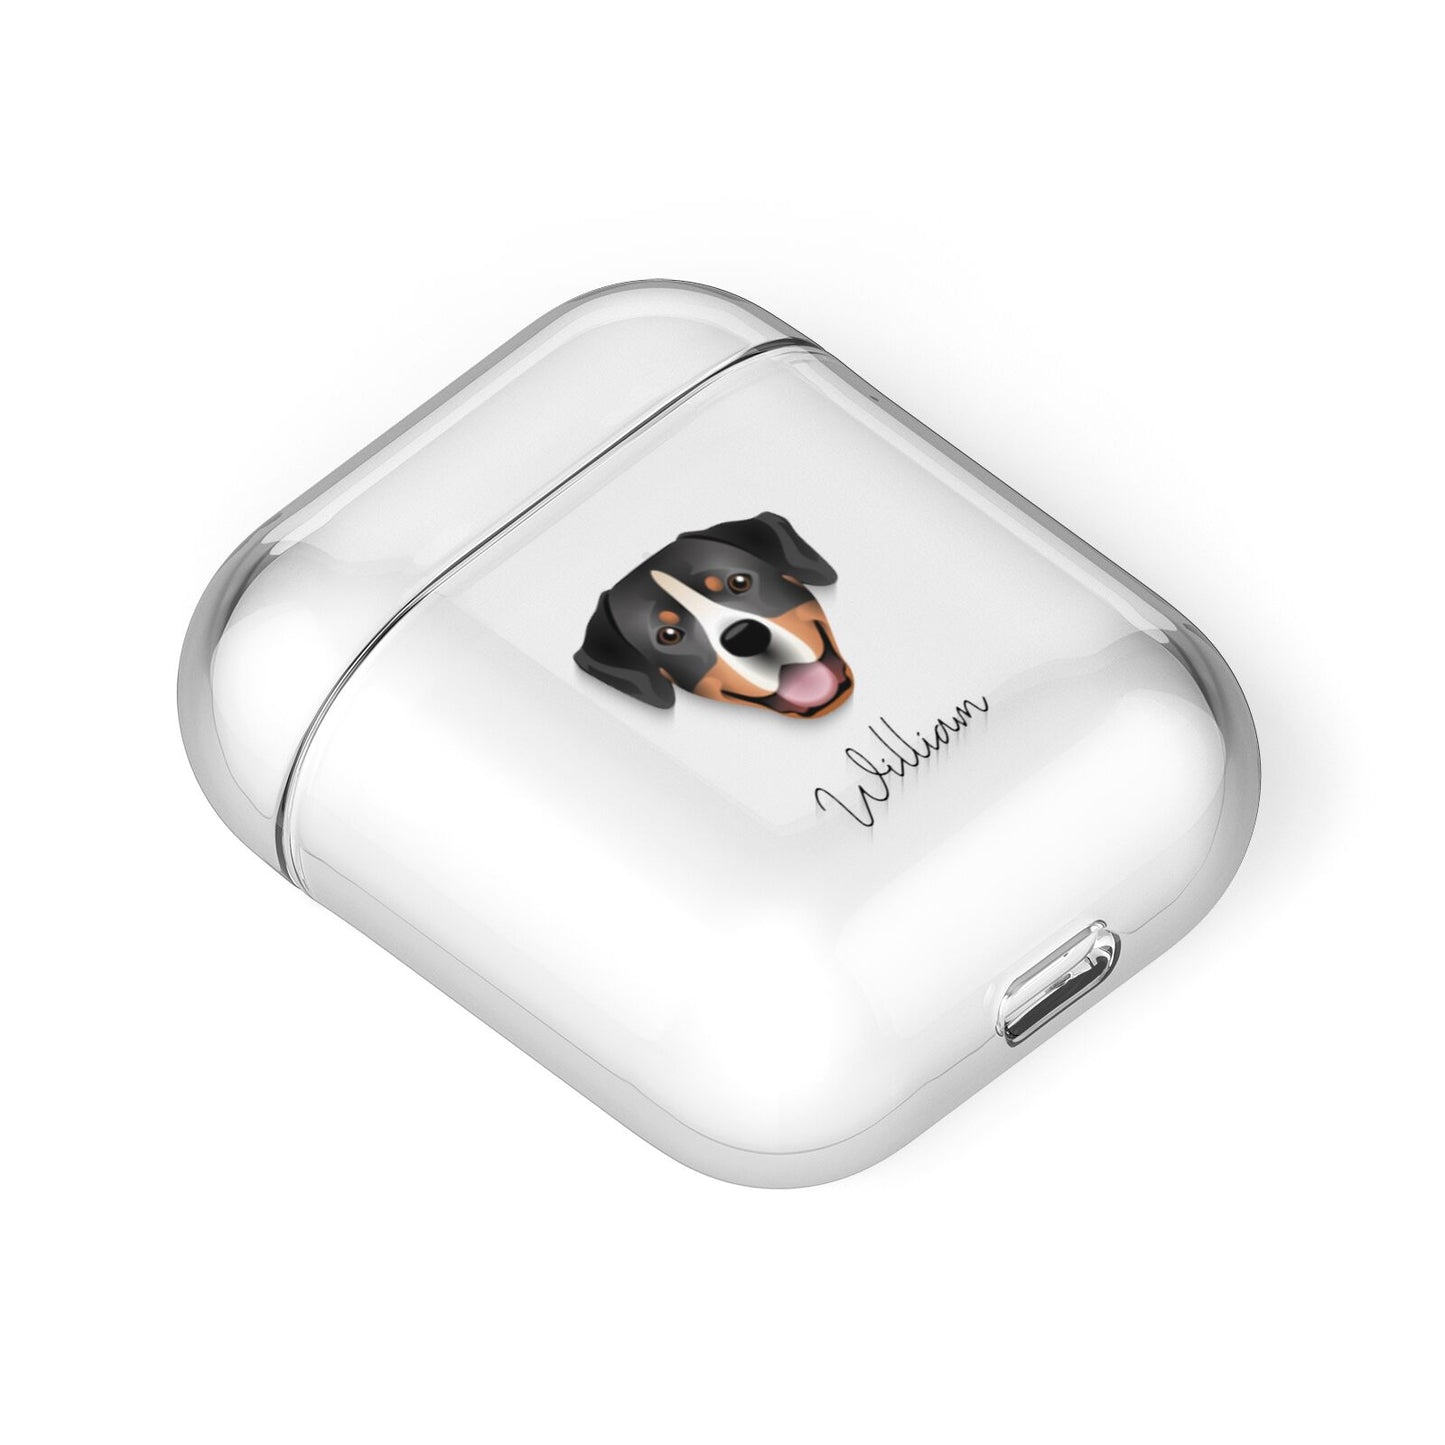 Entlebucher Mountain Dog Personalised AirPods Case Laid Flat